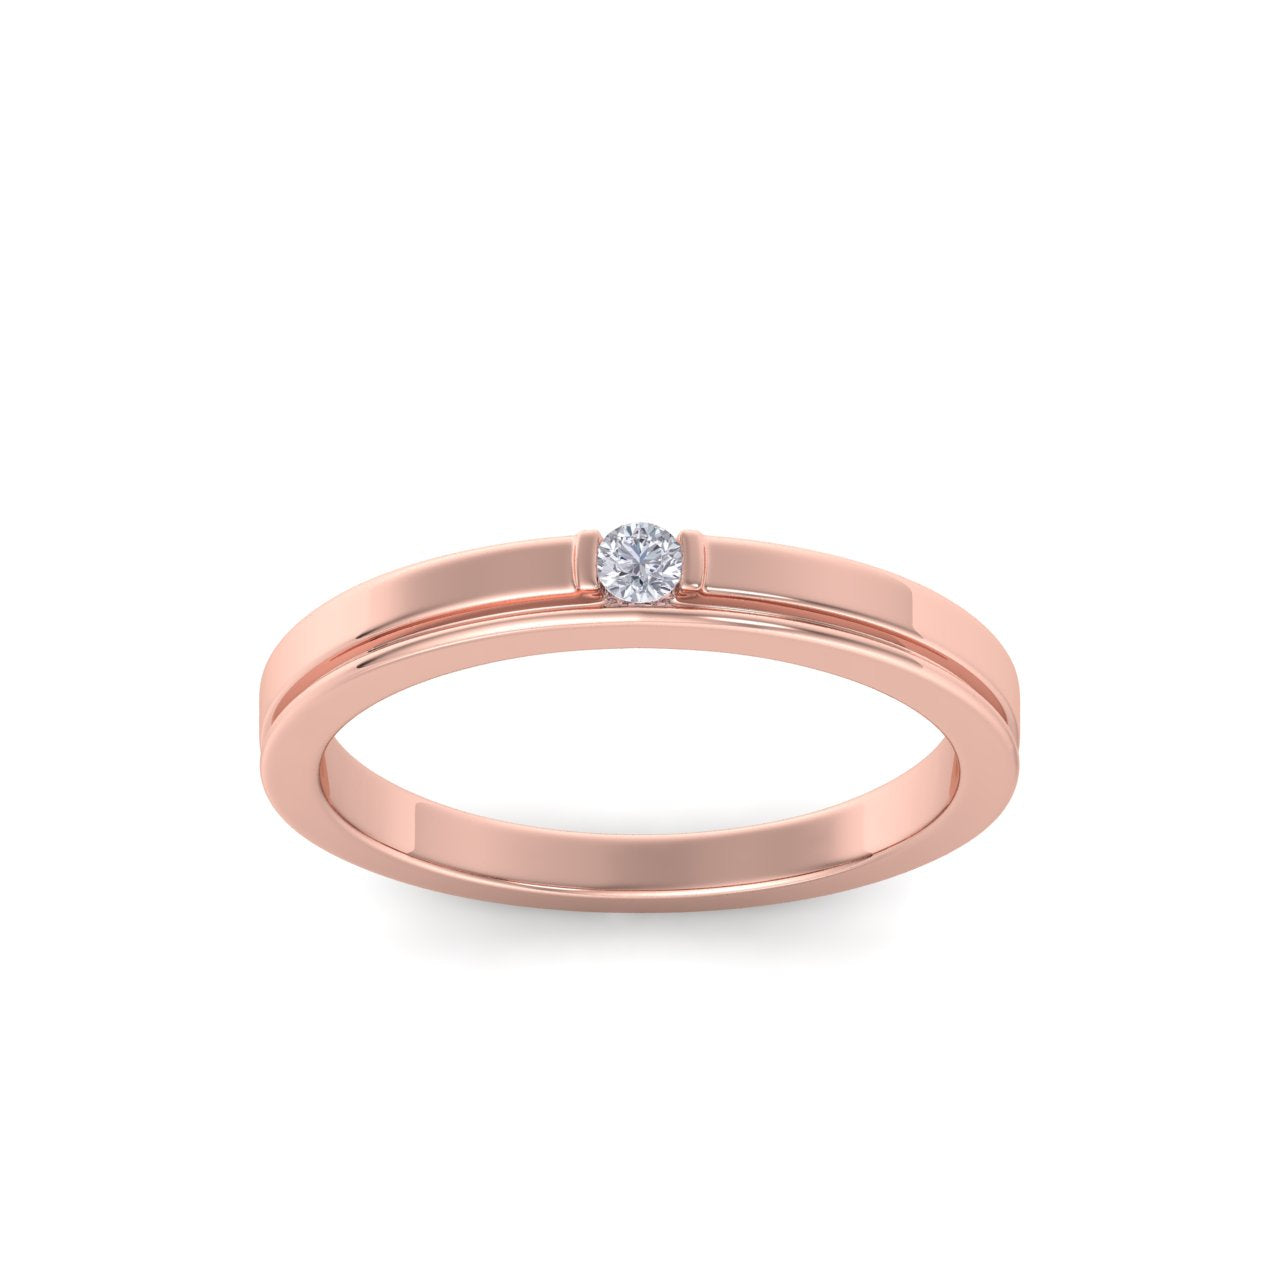 Beautiful Ring in rose gold with white diamonds of 0.05 ct in weight